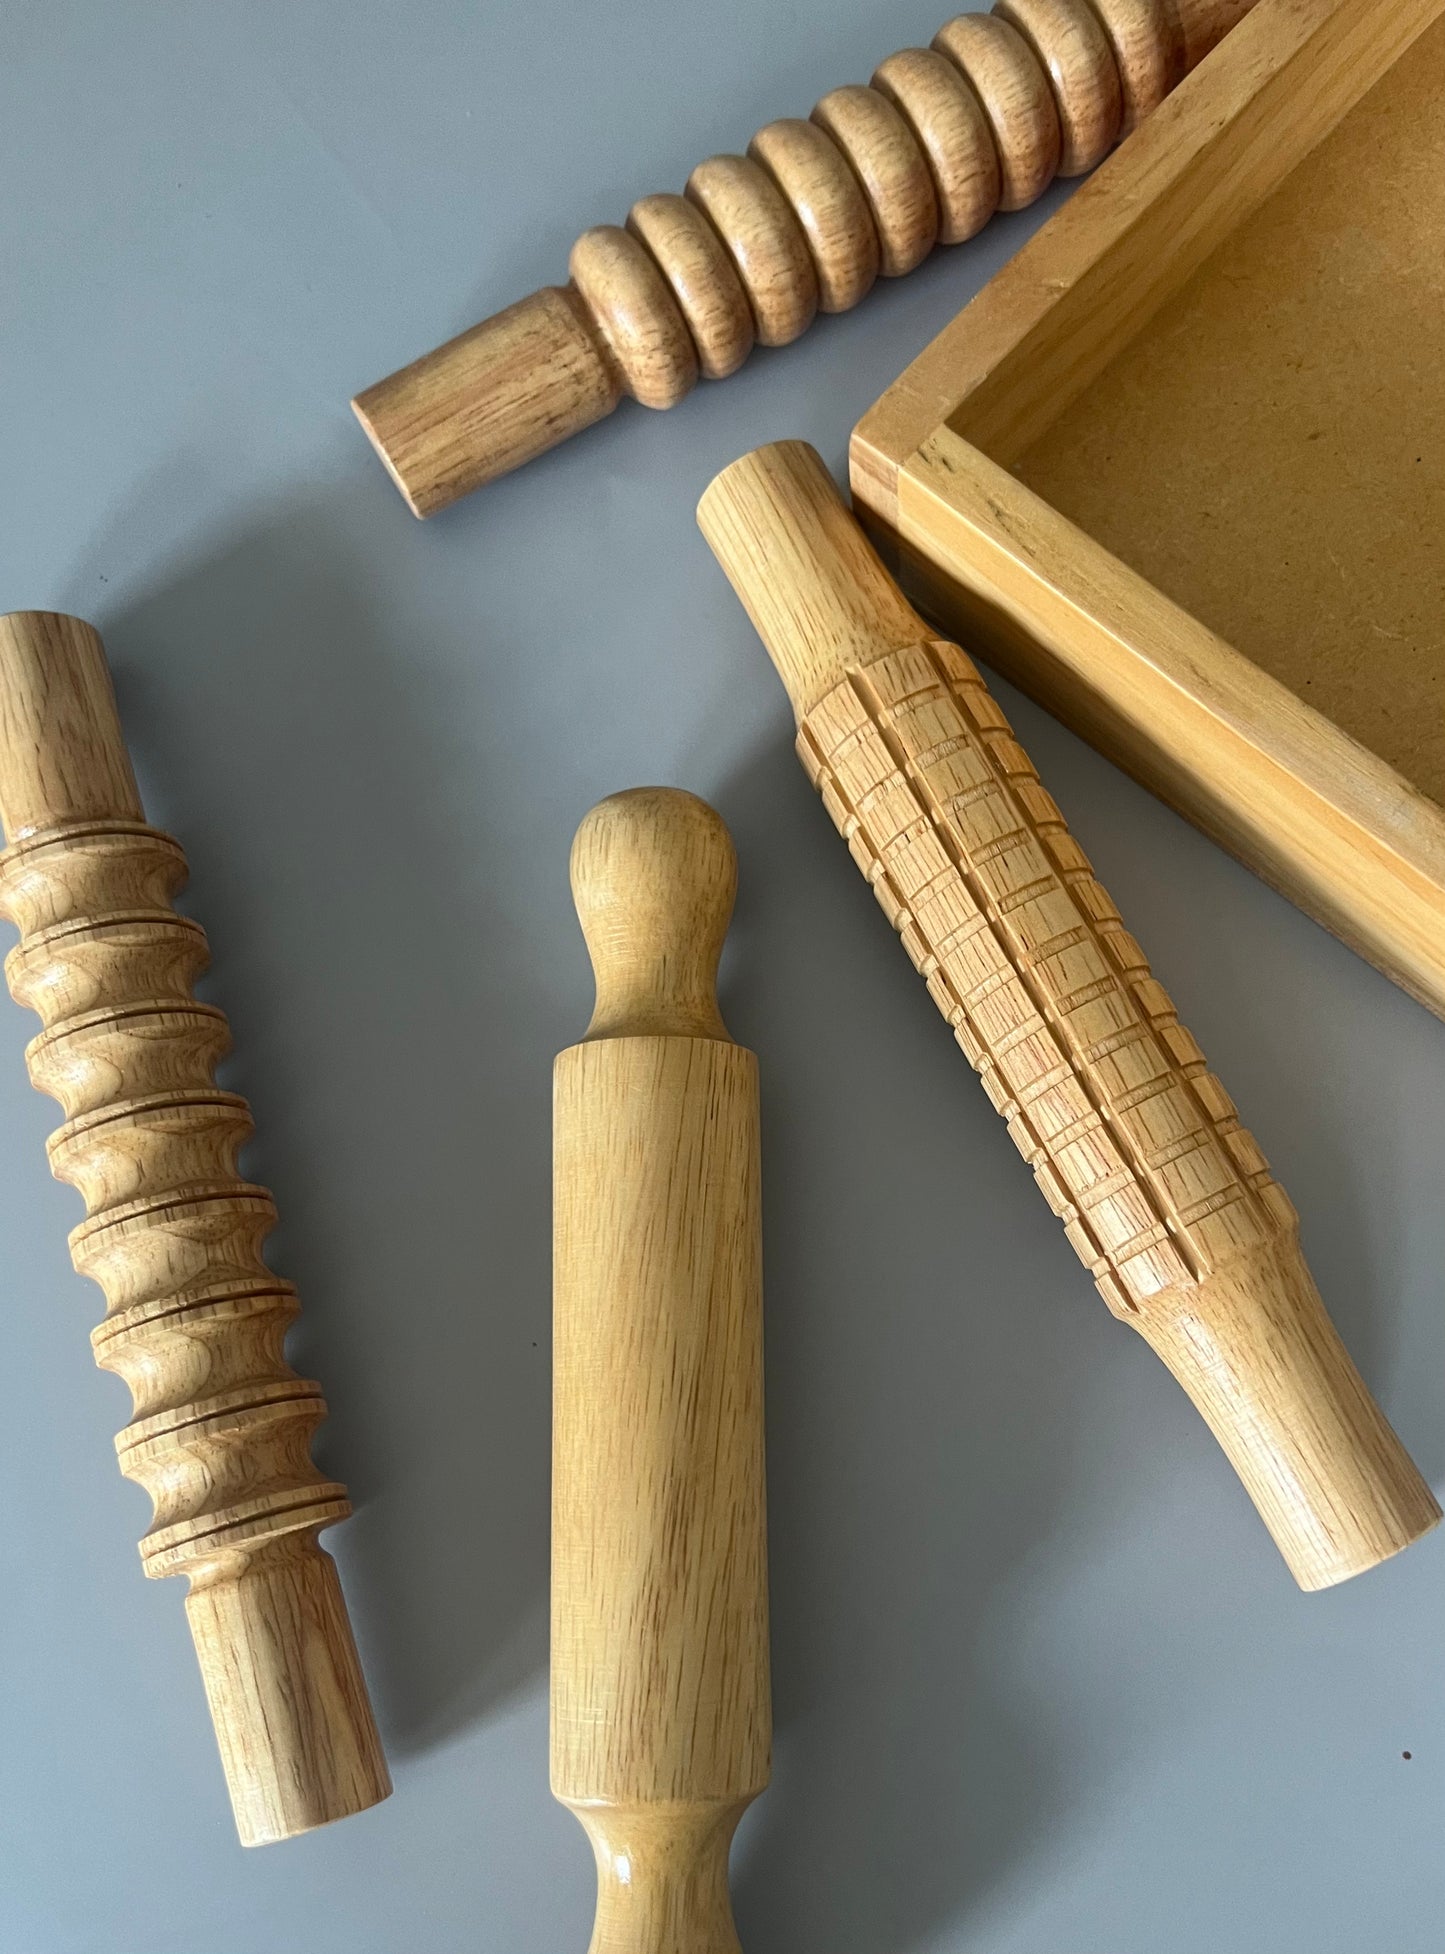 4 WOODEN ROLLING PINS & TRAY